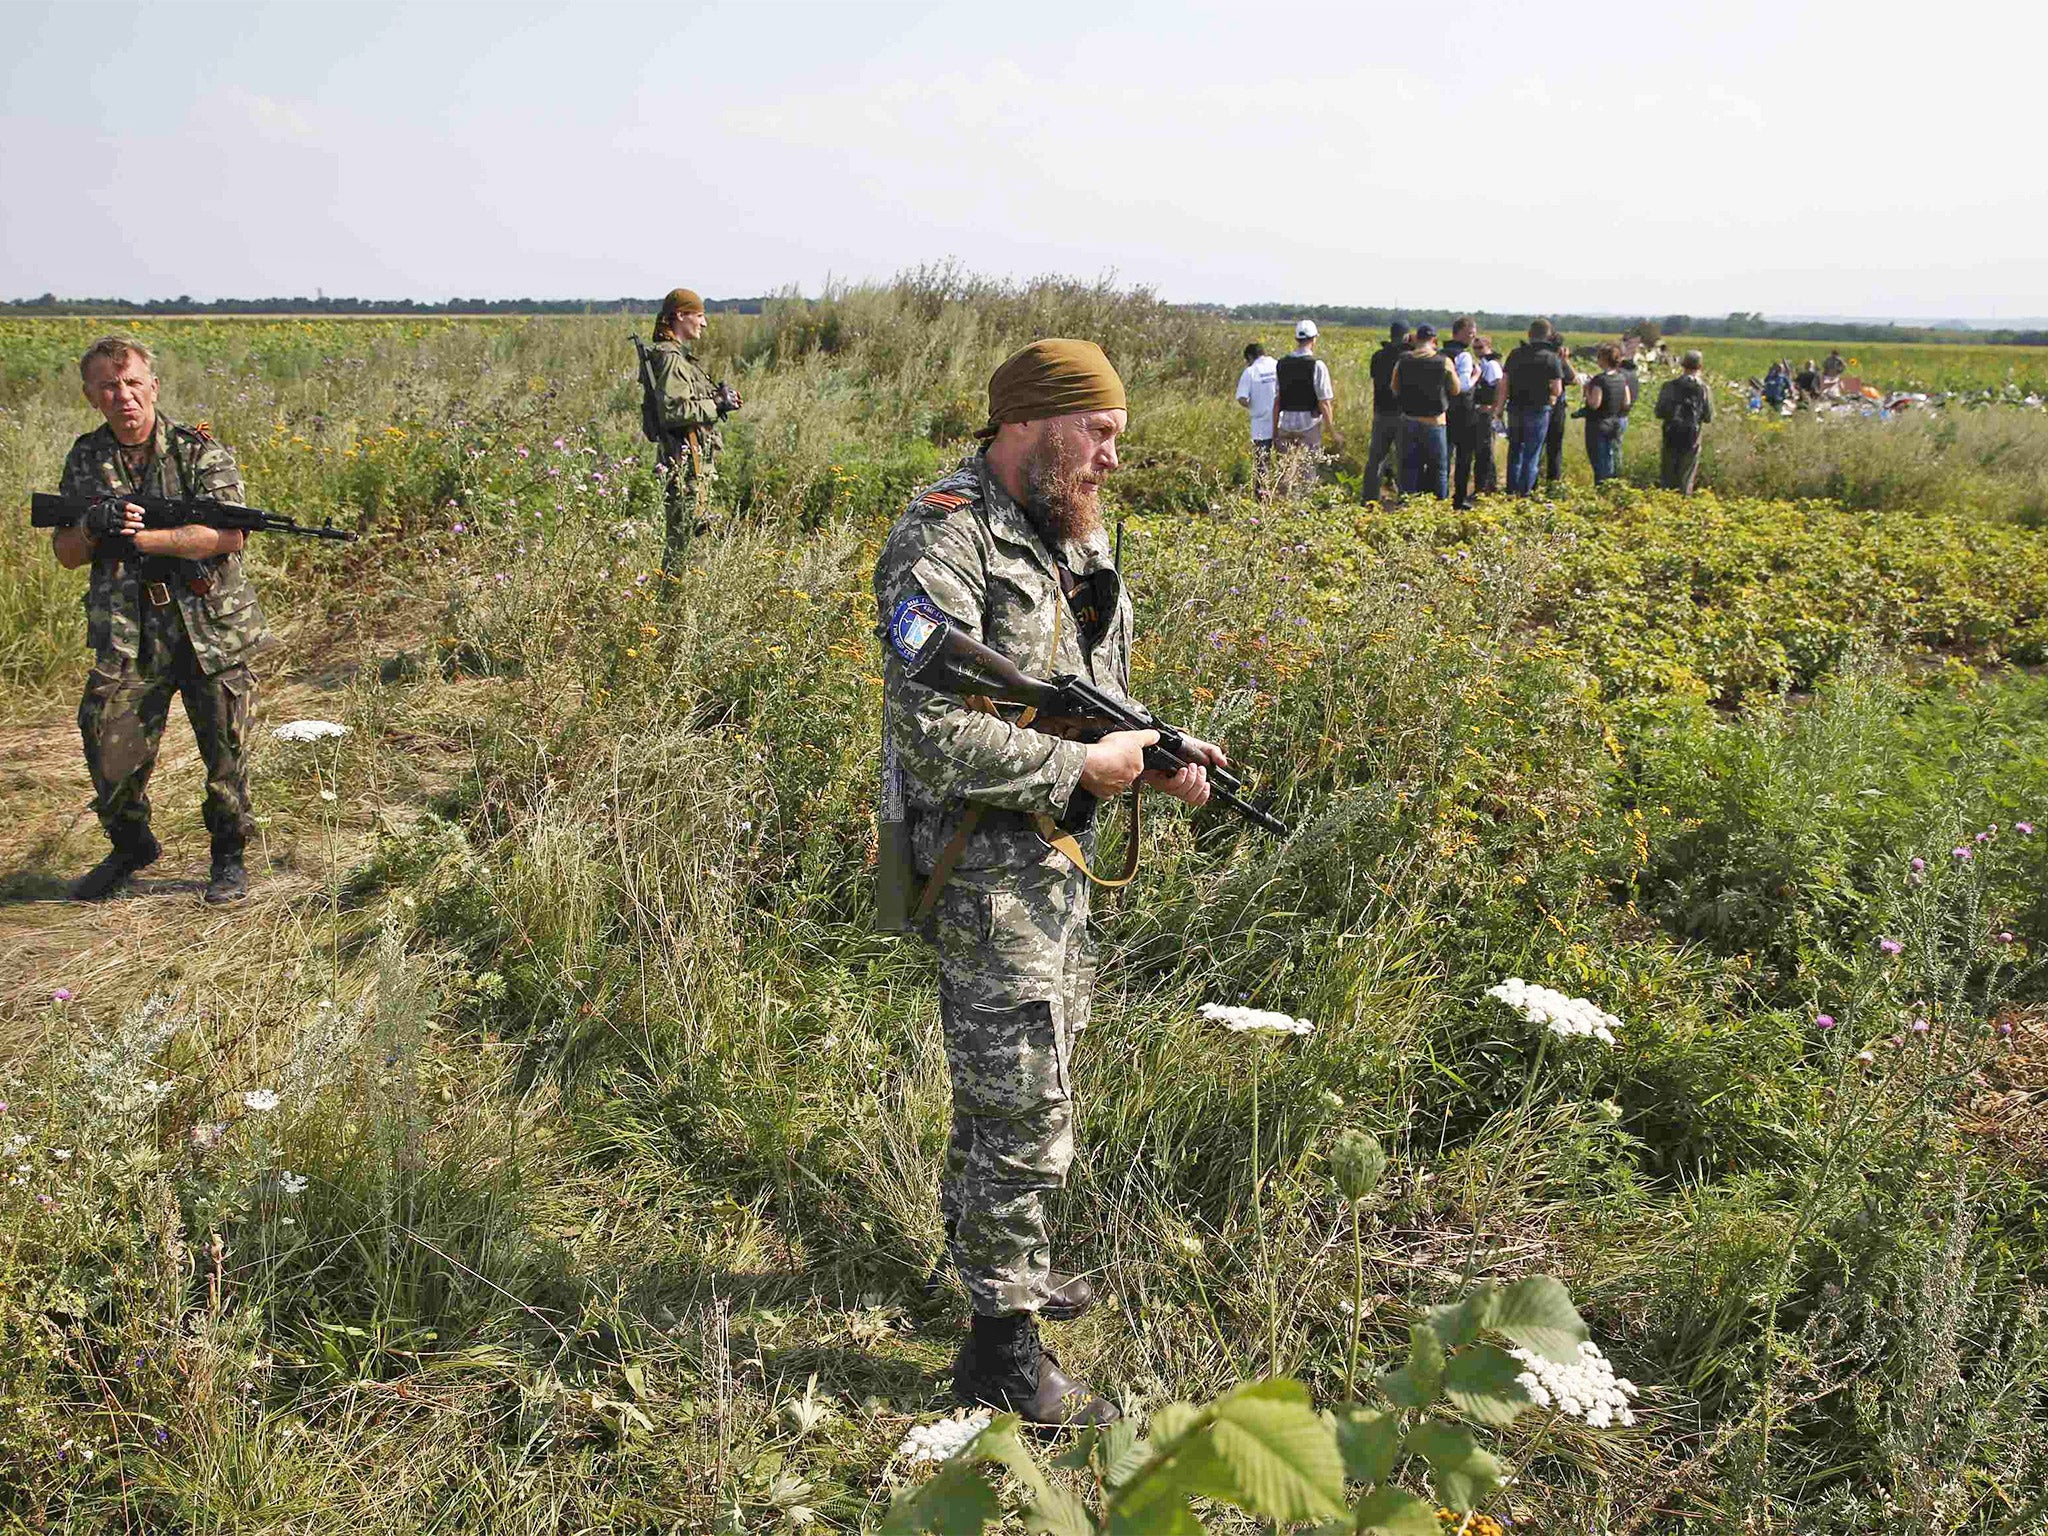 Armed pro-Russian separatists stand guard as monitors from the Organization for Security and Cooperation in Europe (OSCE) and members of a Malaysian air crash investigation team inspect the crash site of flight MH17